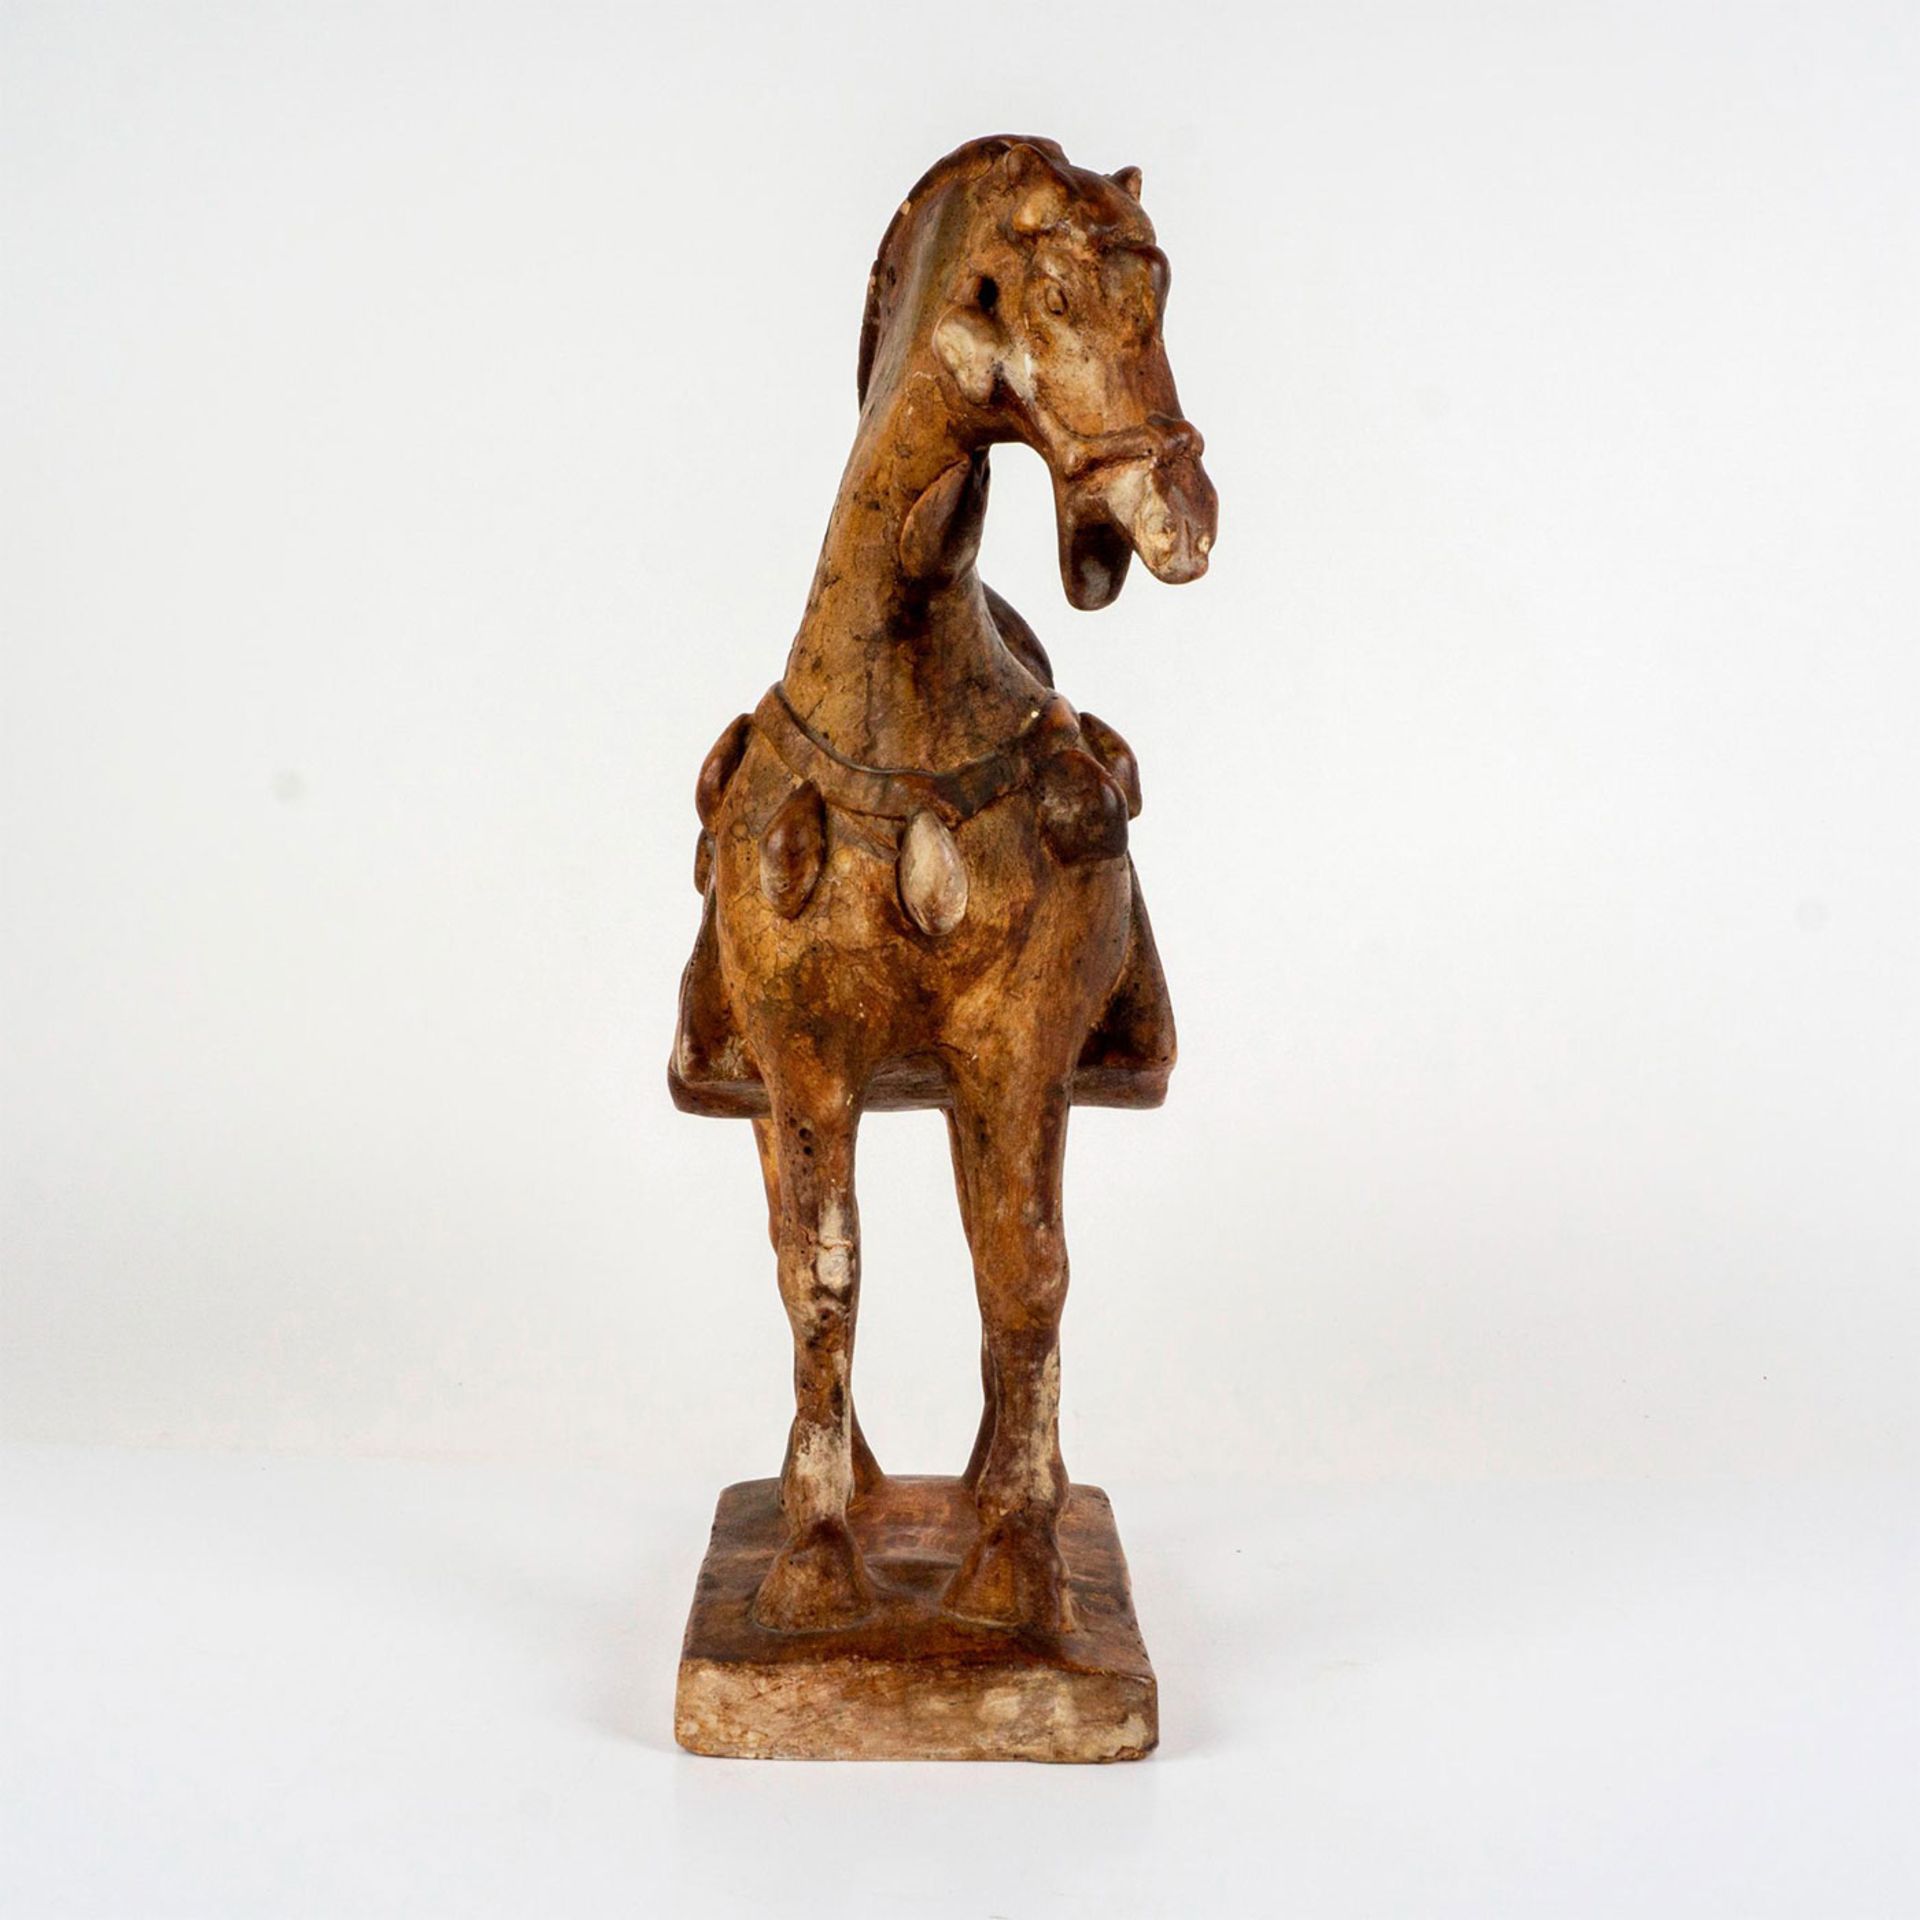 Tang Warrior Horse Sculpture - Image 6 of 7